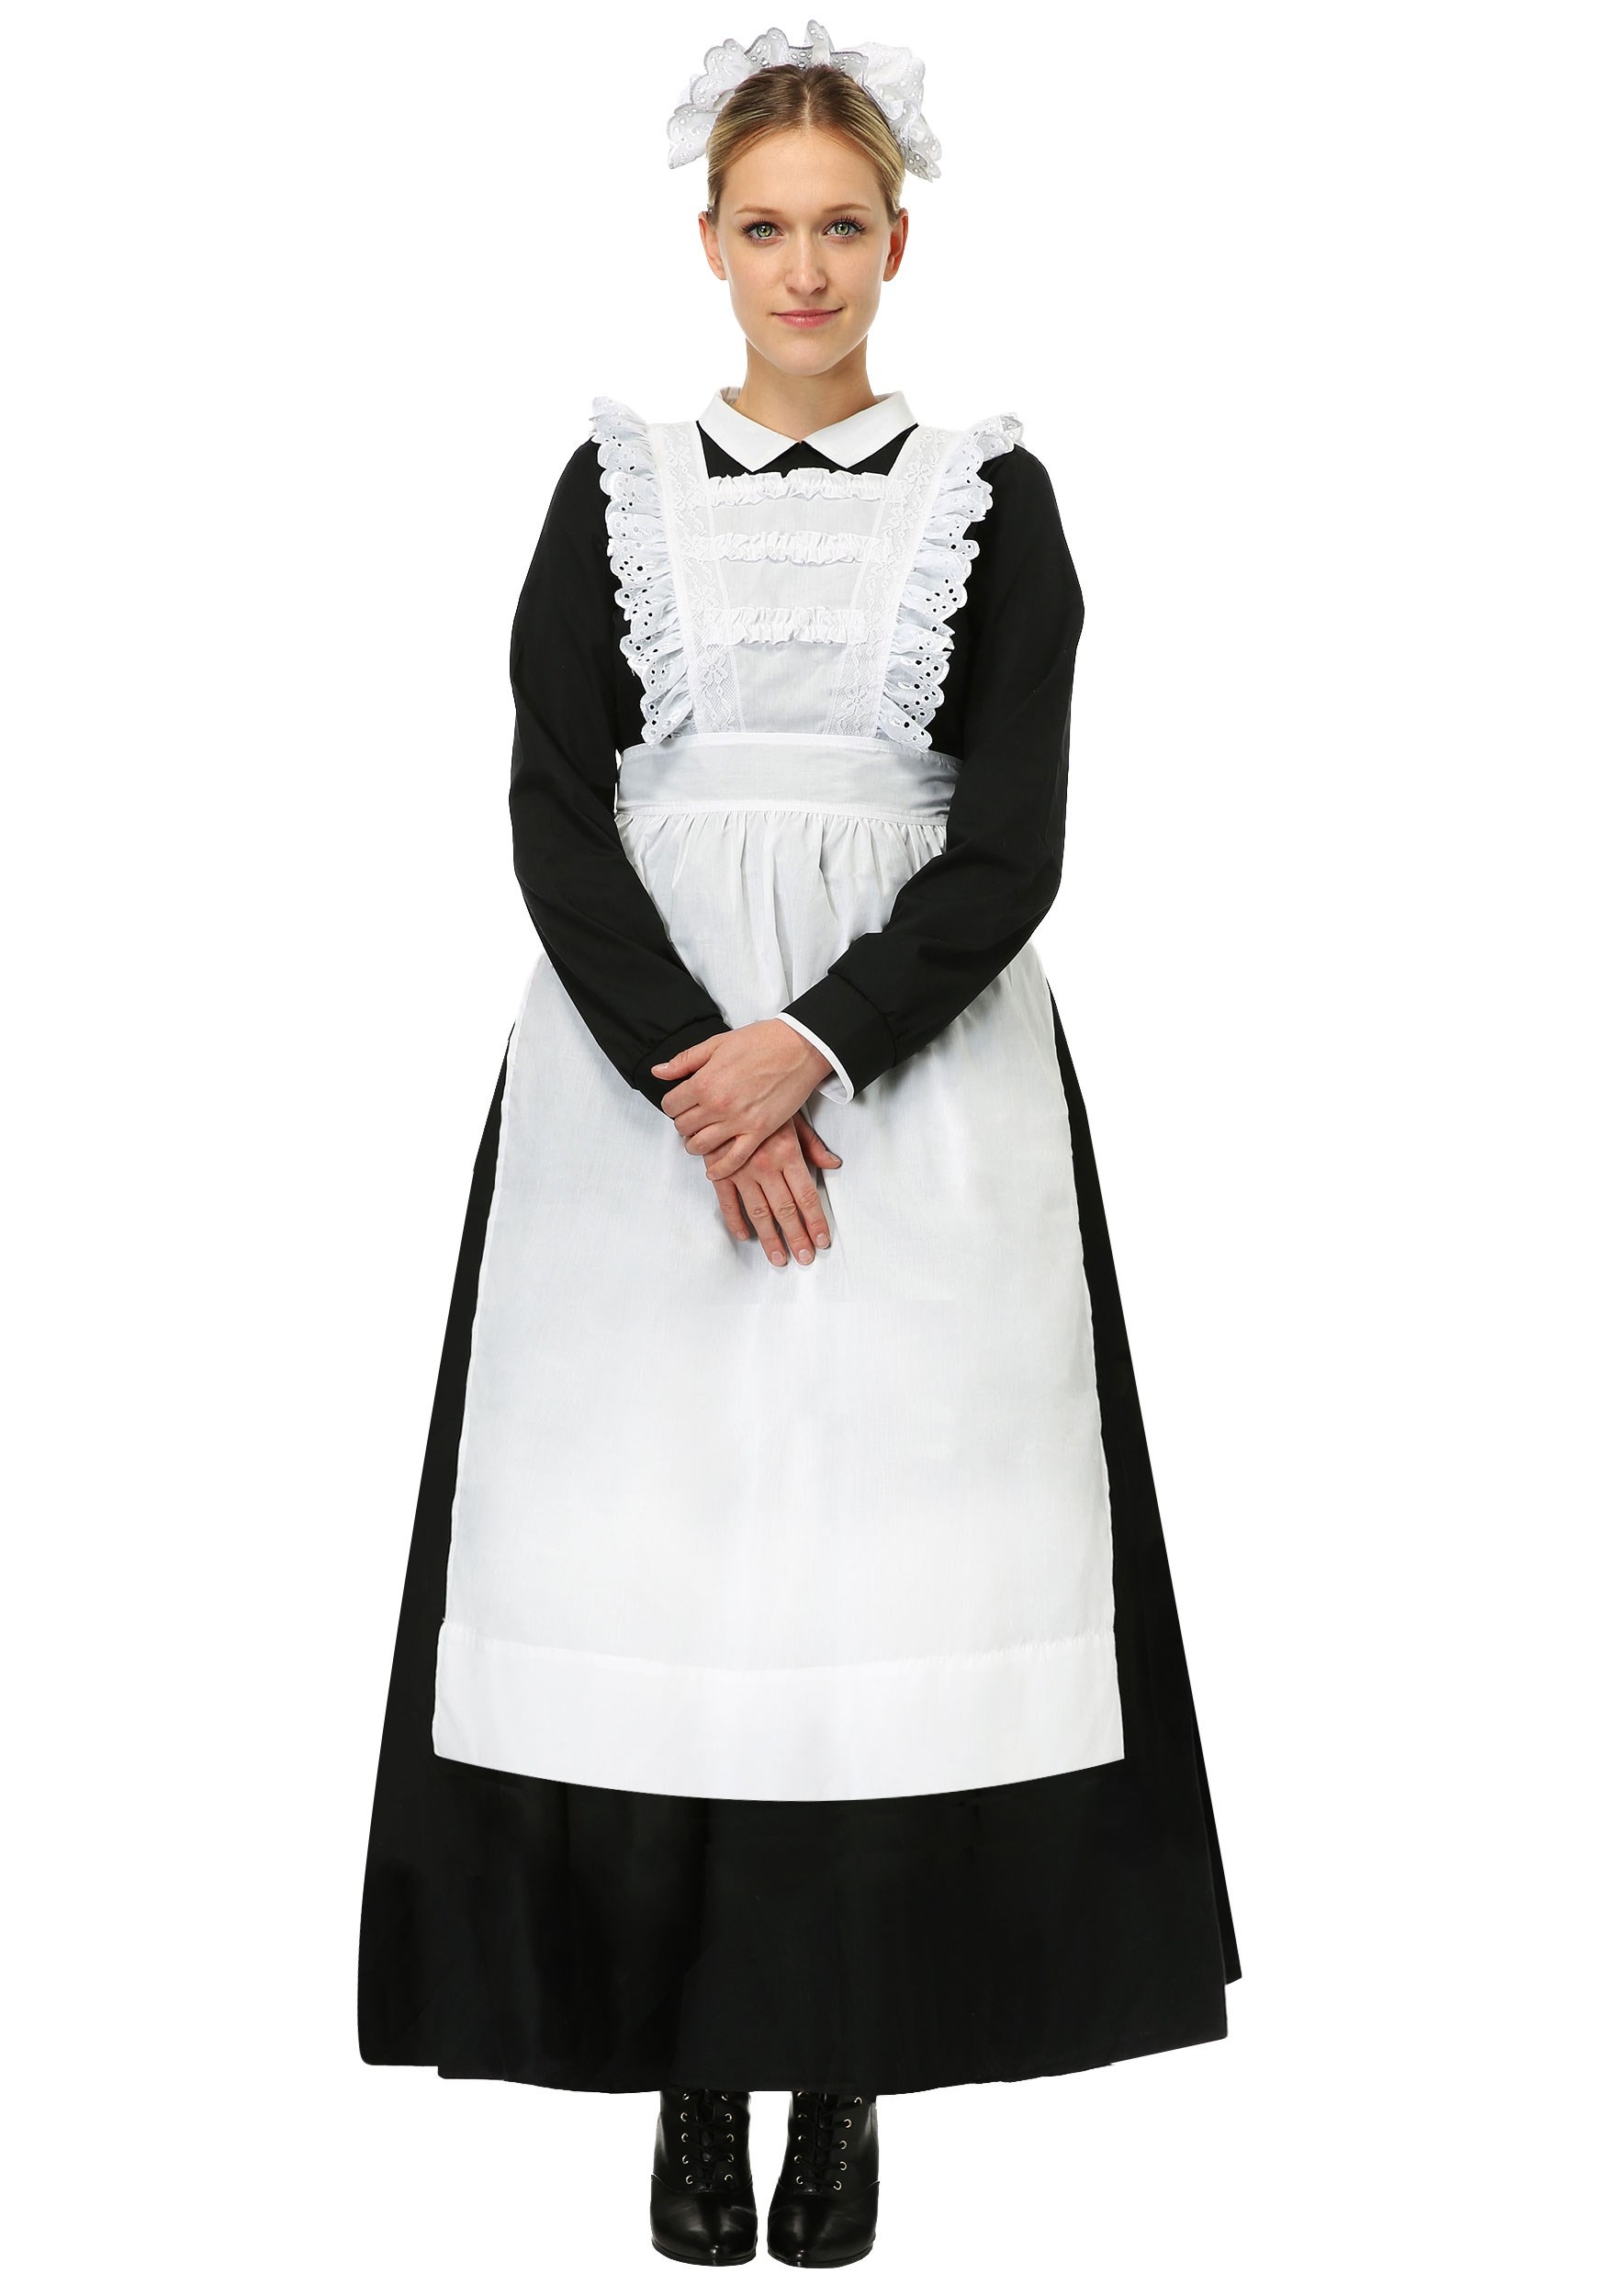 Traditional Plus Size Maid Costume For Women